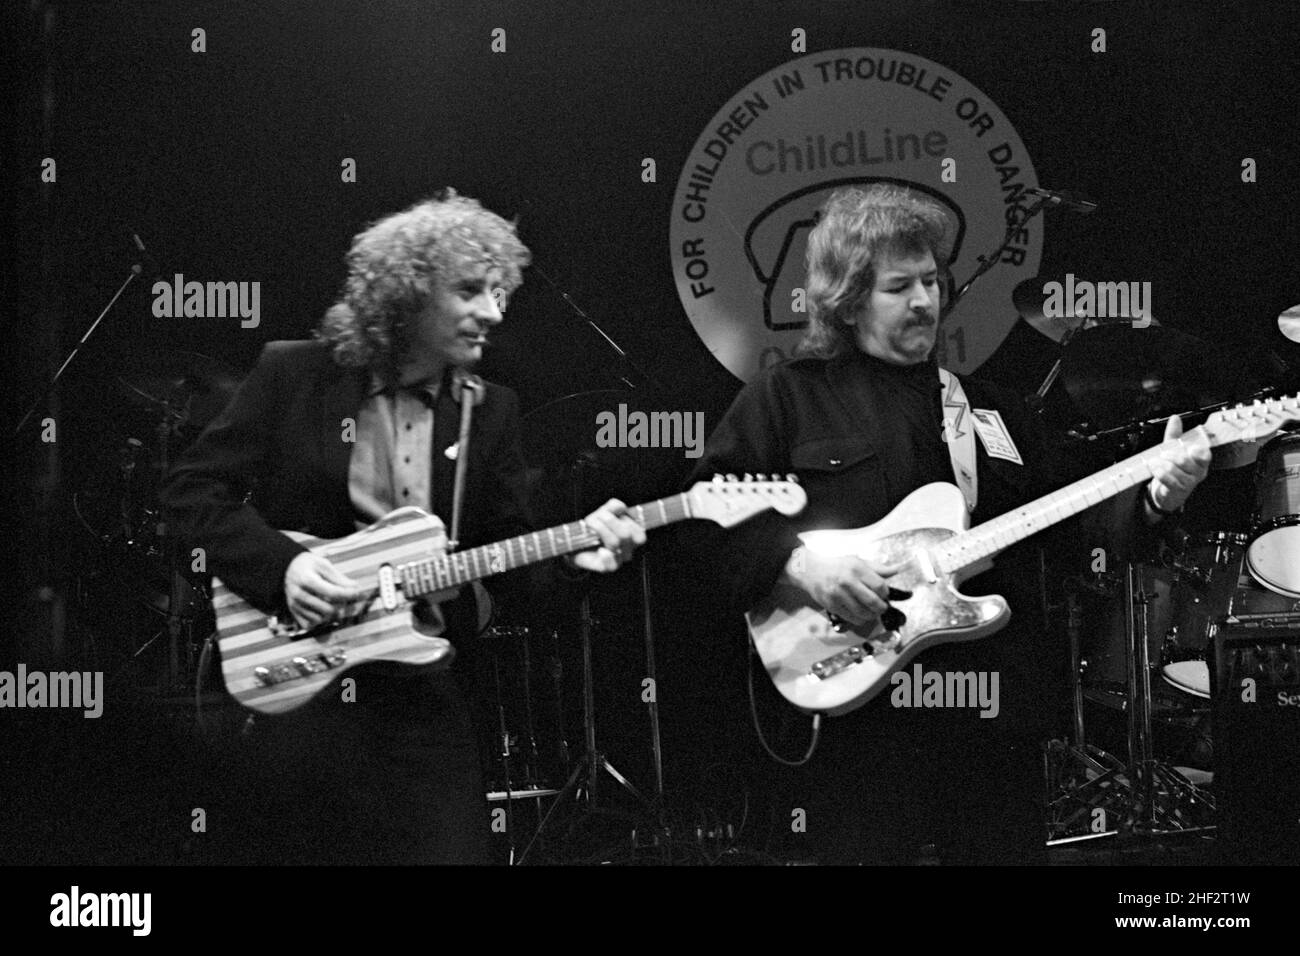 Albert Lee and Seymour Duncan performing at a charity jam at the Town & Country Club, London, England in 1987. Stock Photo